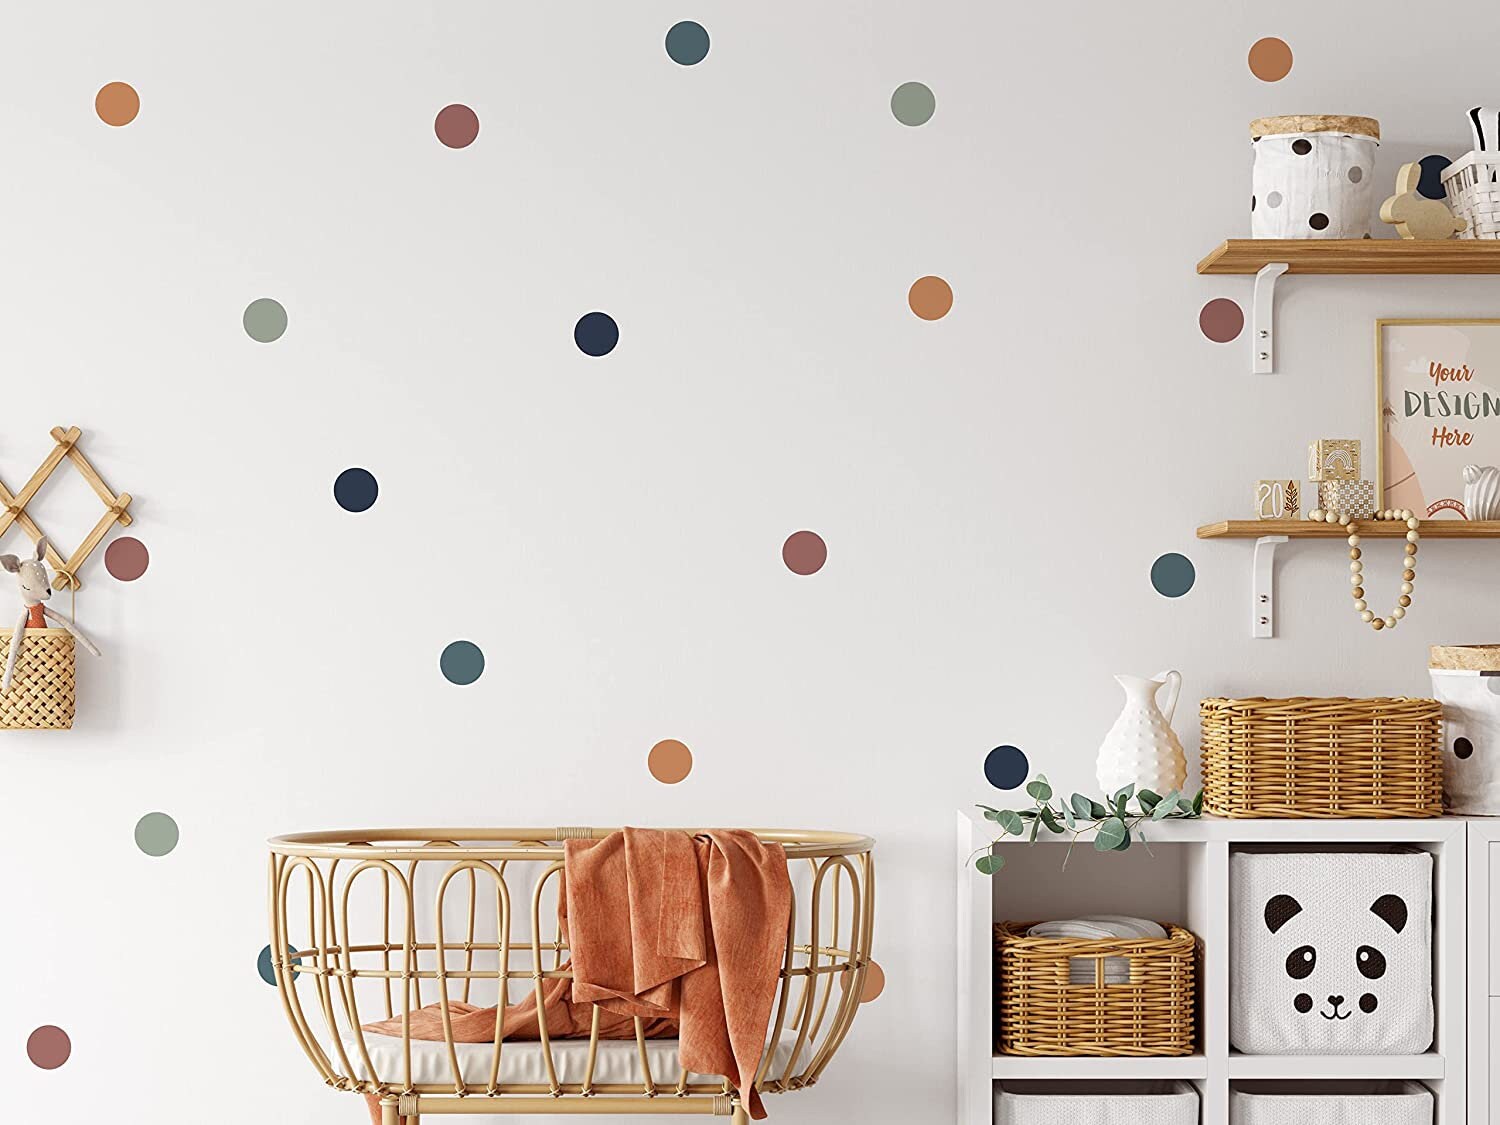 Removable Boho Chic Polka Dot Wall Stickers Decals Chic Wall Art For Home Nursery Kids Rooms Children's Decor